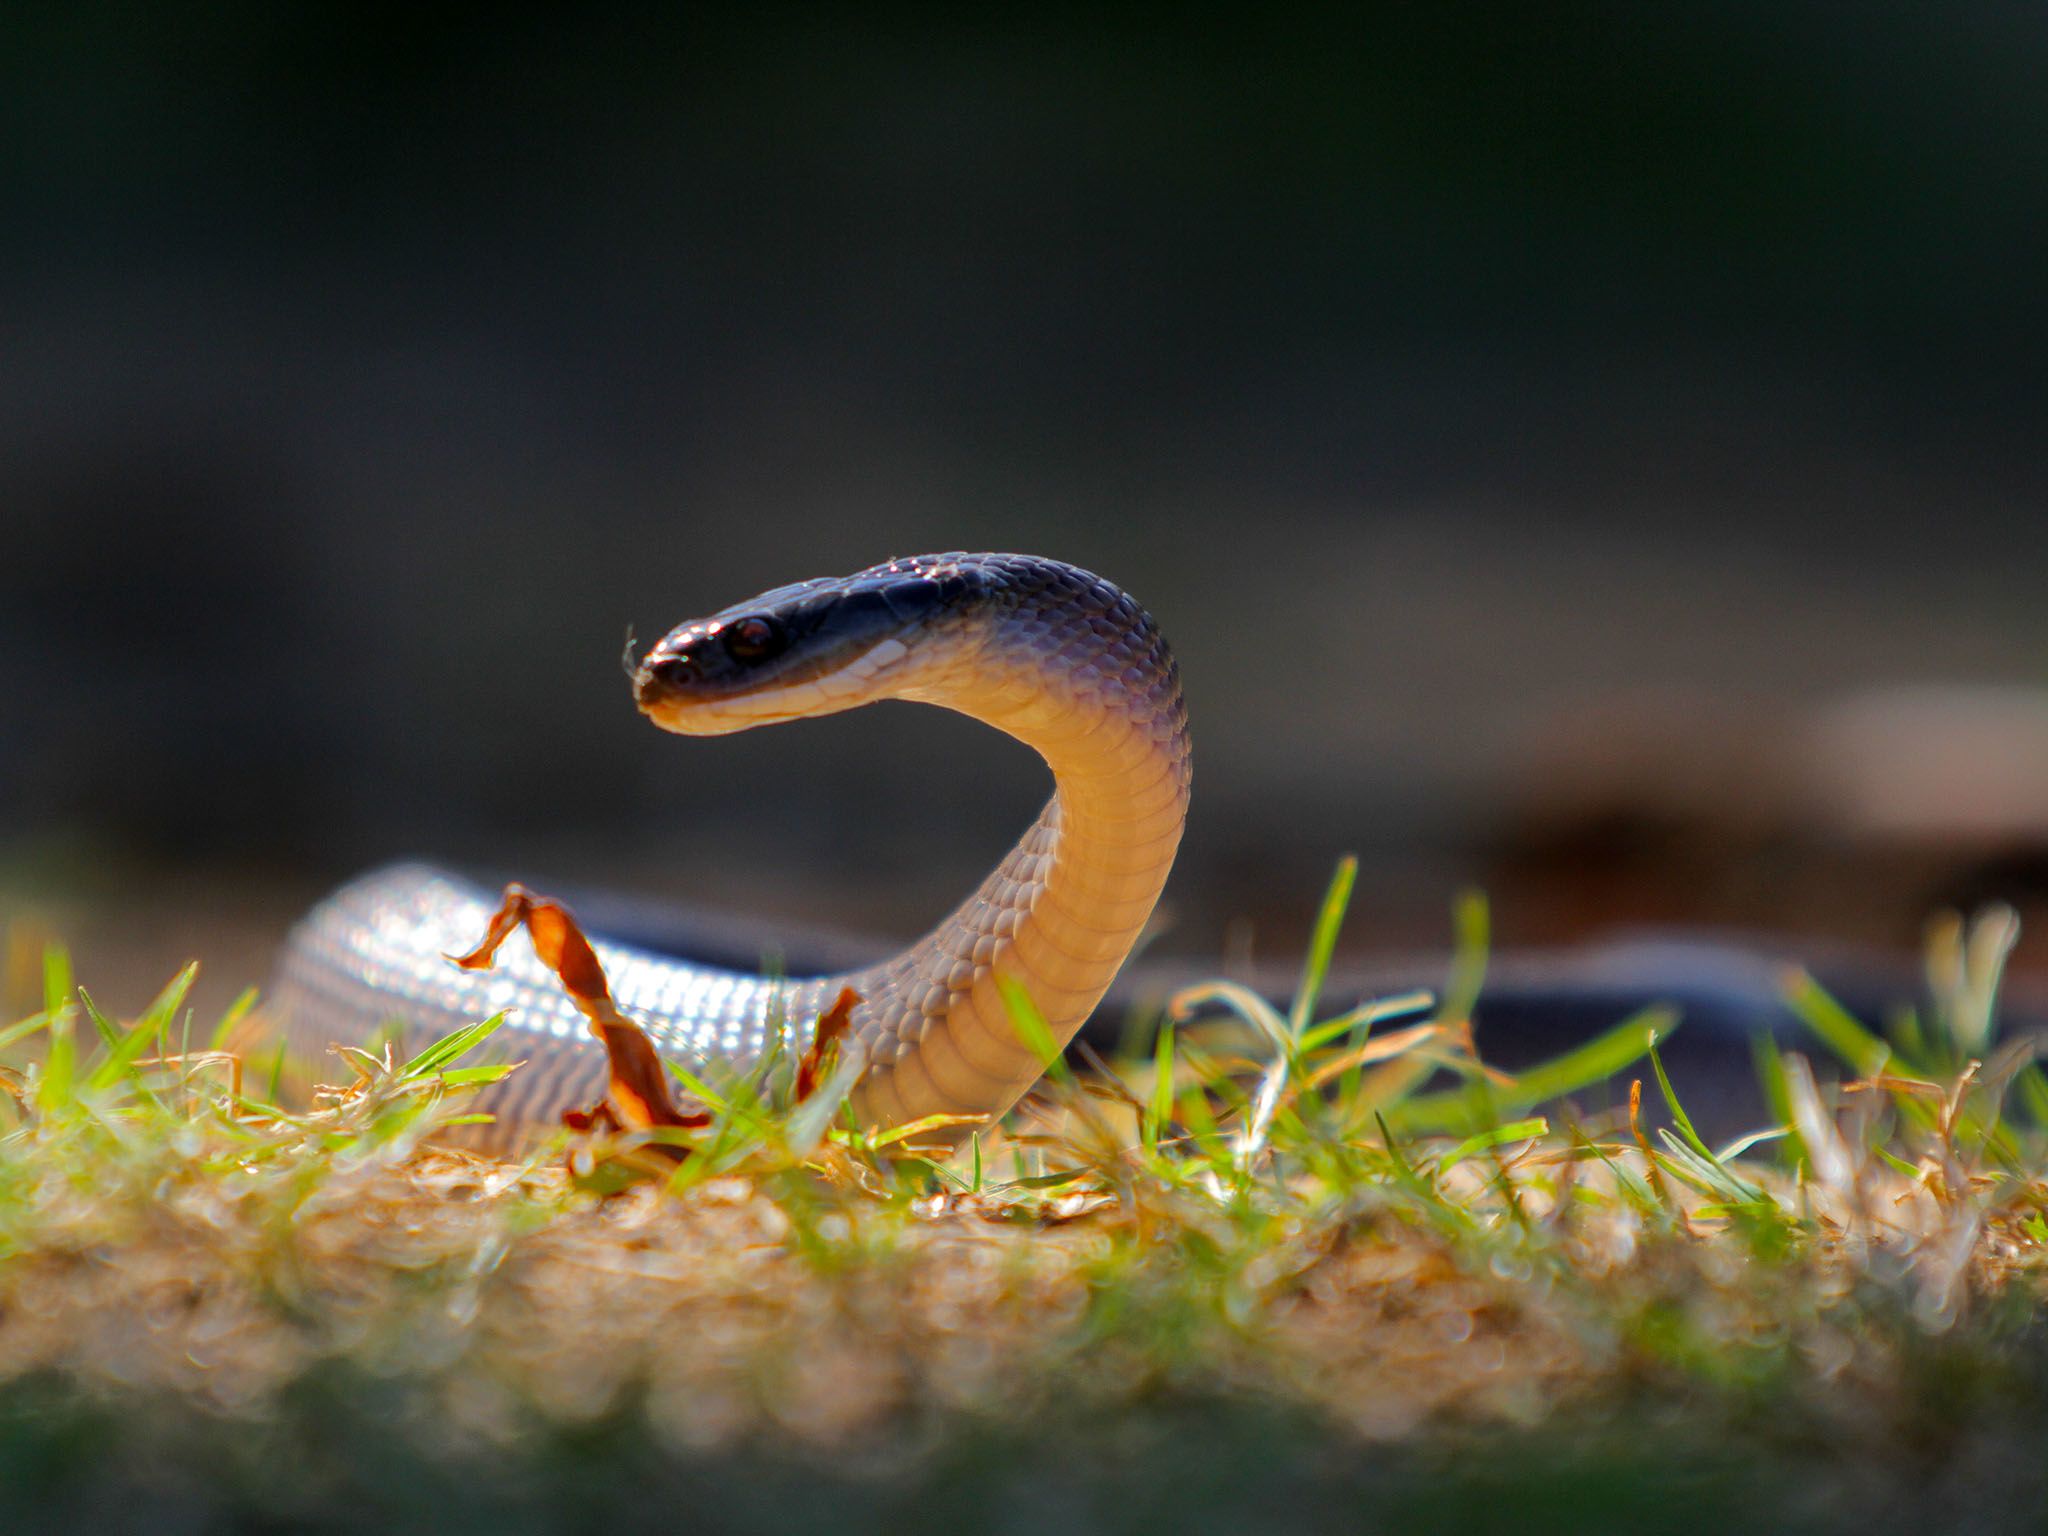 House snake Lamprophi. This image is from Snake City. [Photo of the day - January 2016]